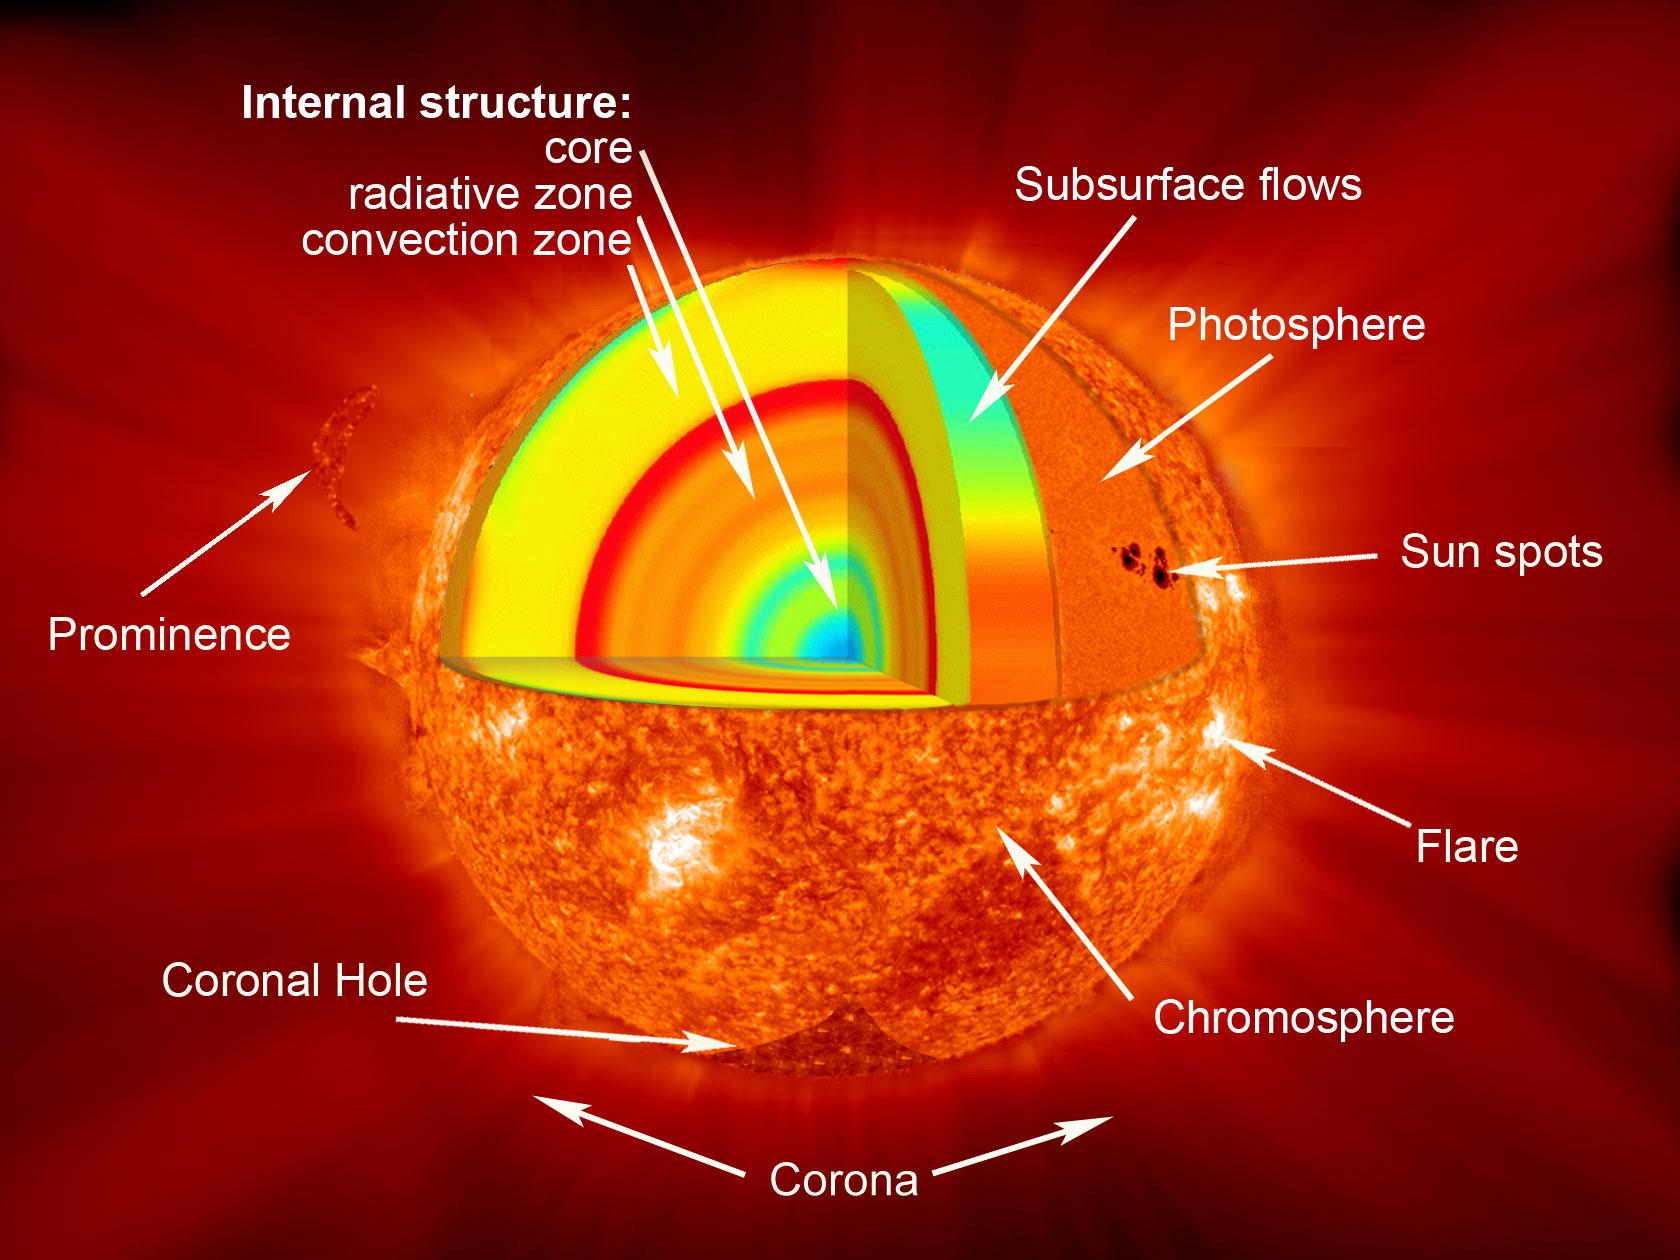 the internal structure of the sun